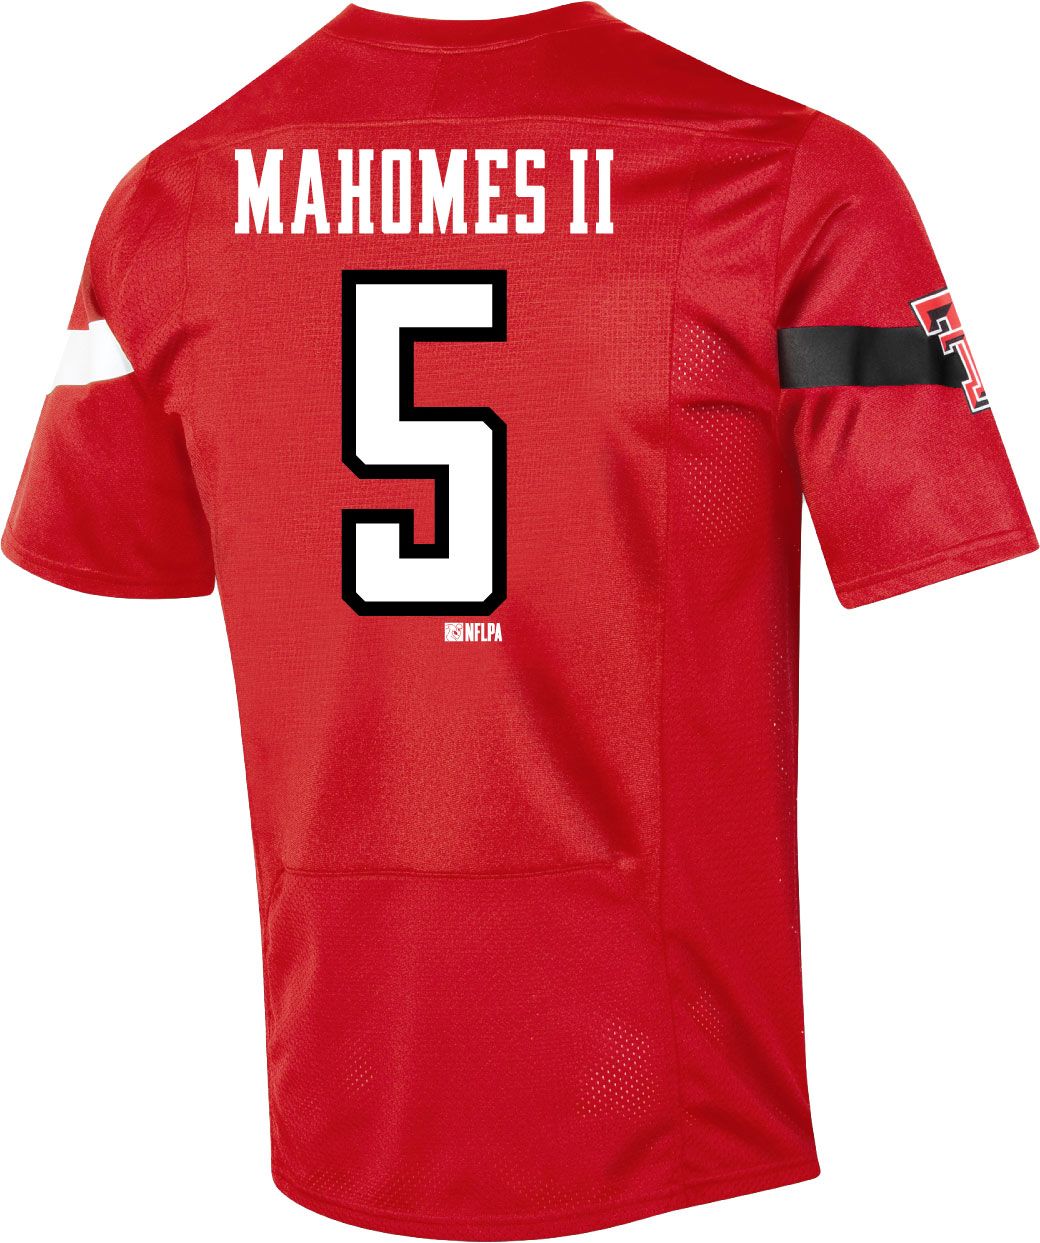 Red Raiders soccer jersey